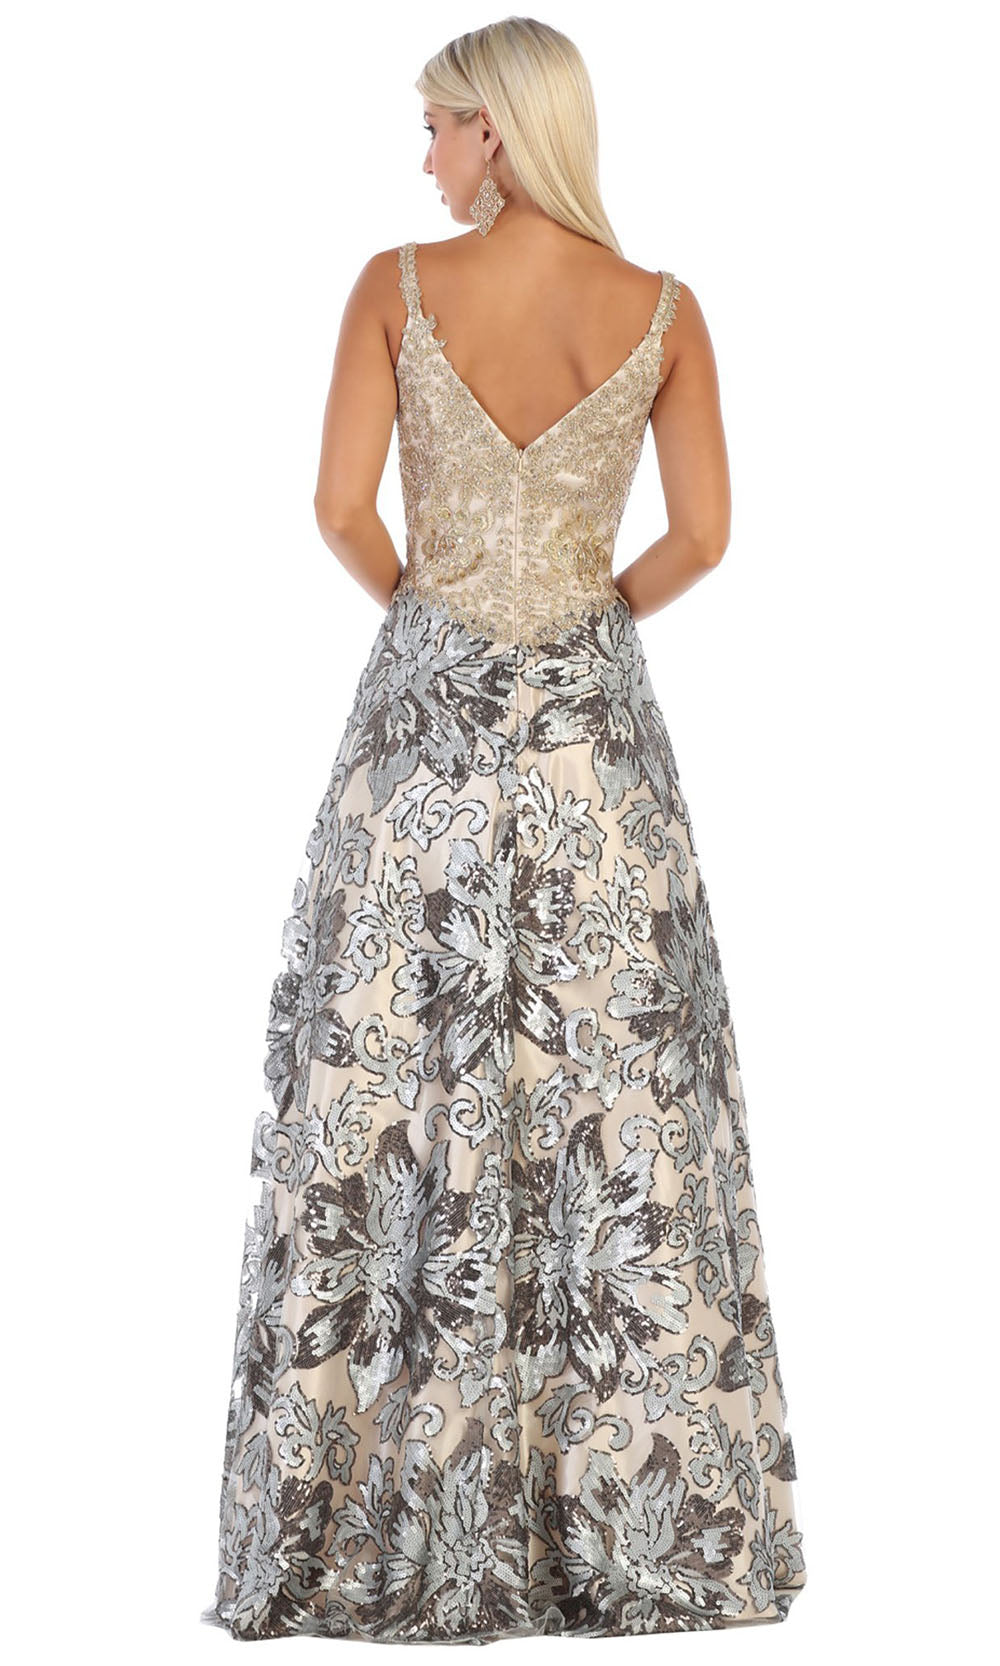 May Queen - RQ7655 V Neck Sequined Gown In Silver and Gold